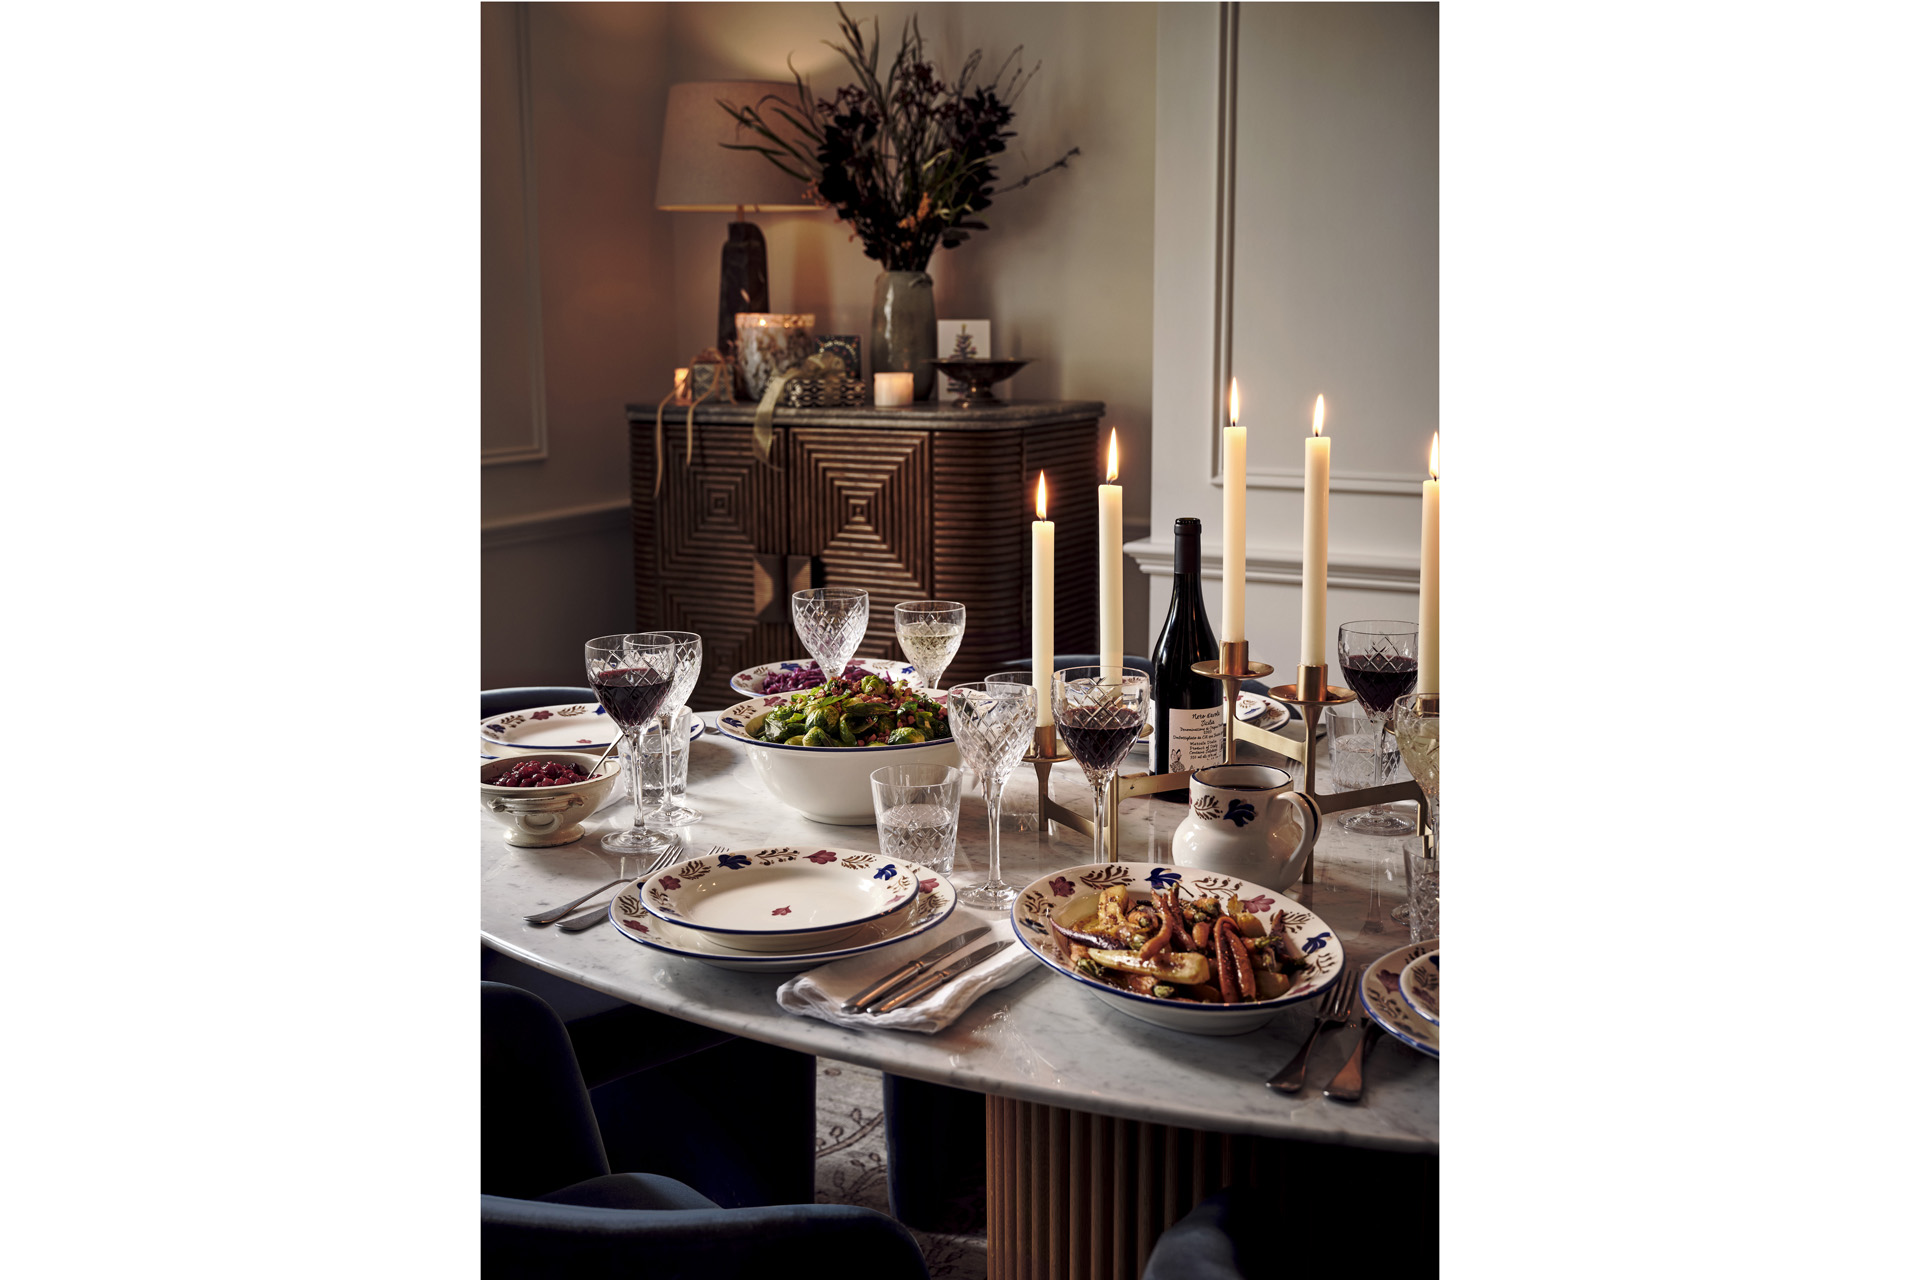 a festive table set with plates, food and candles